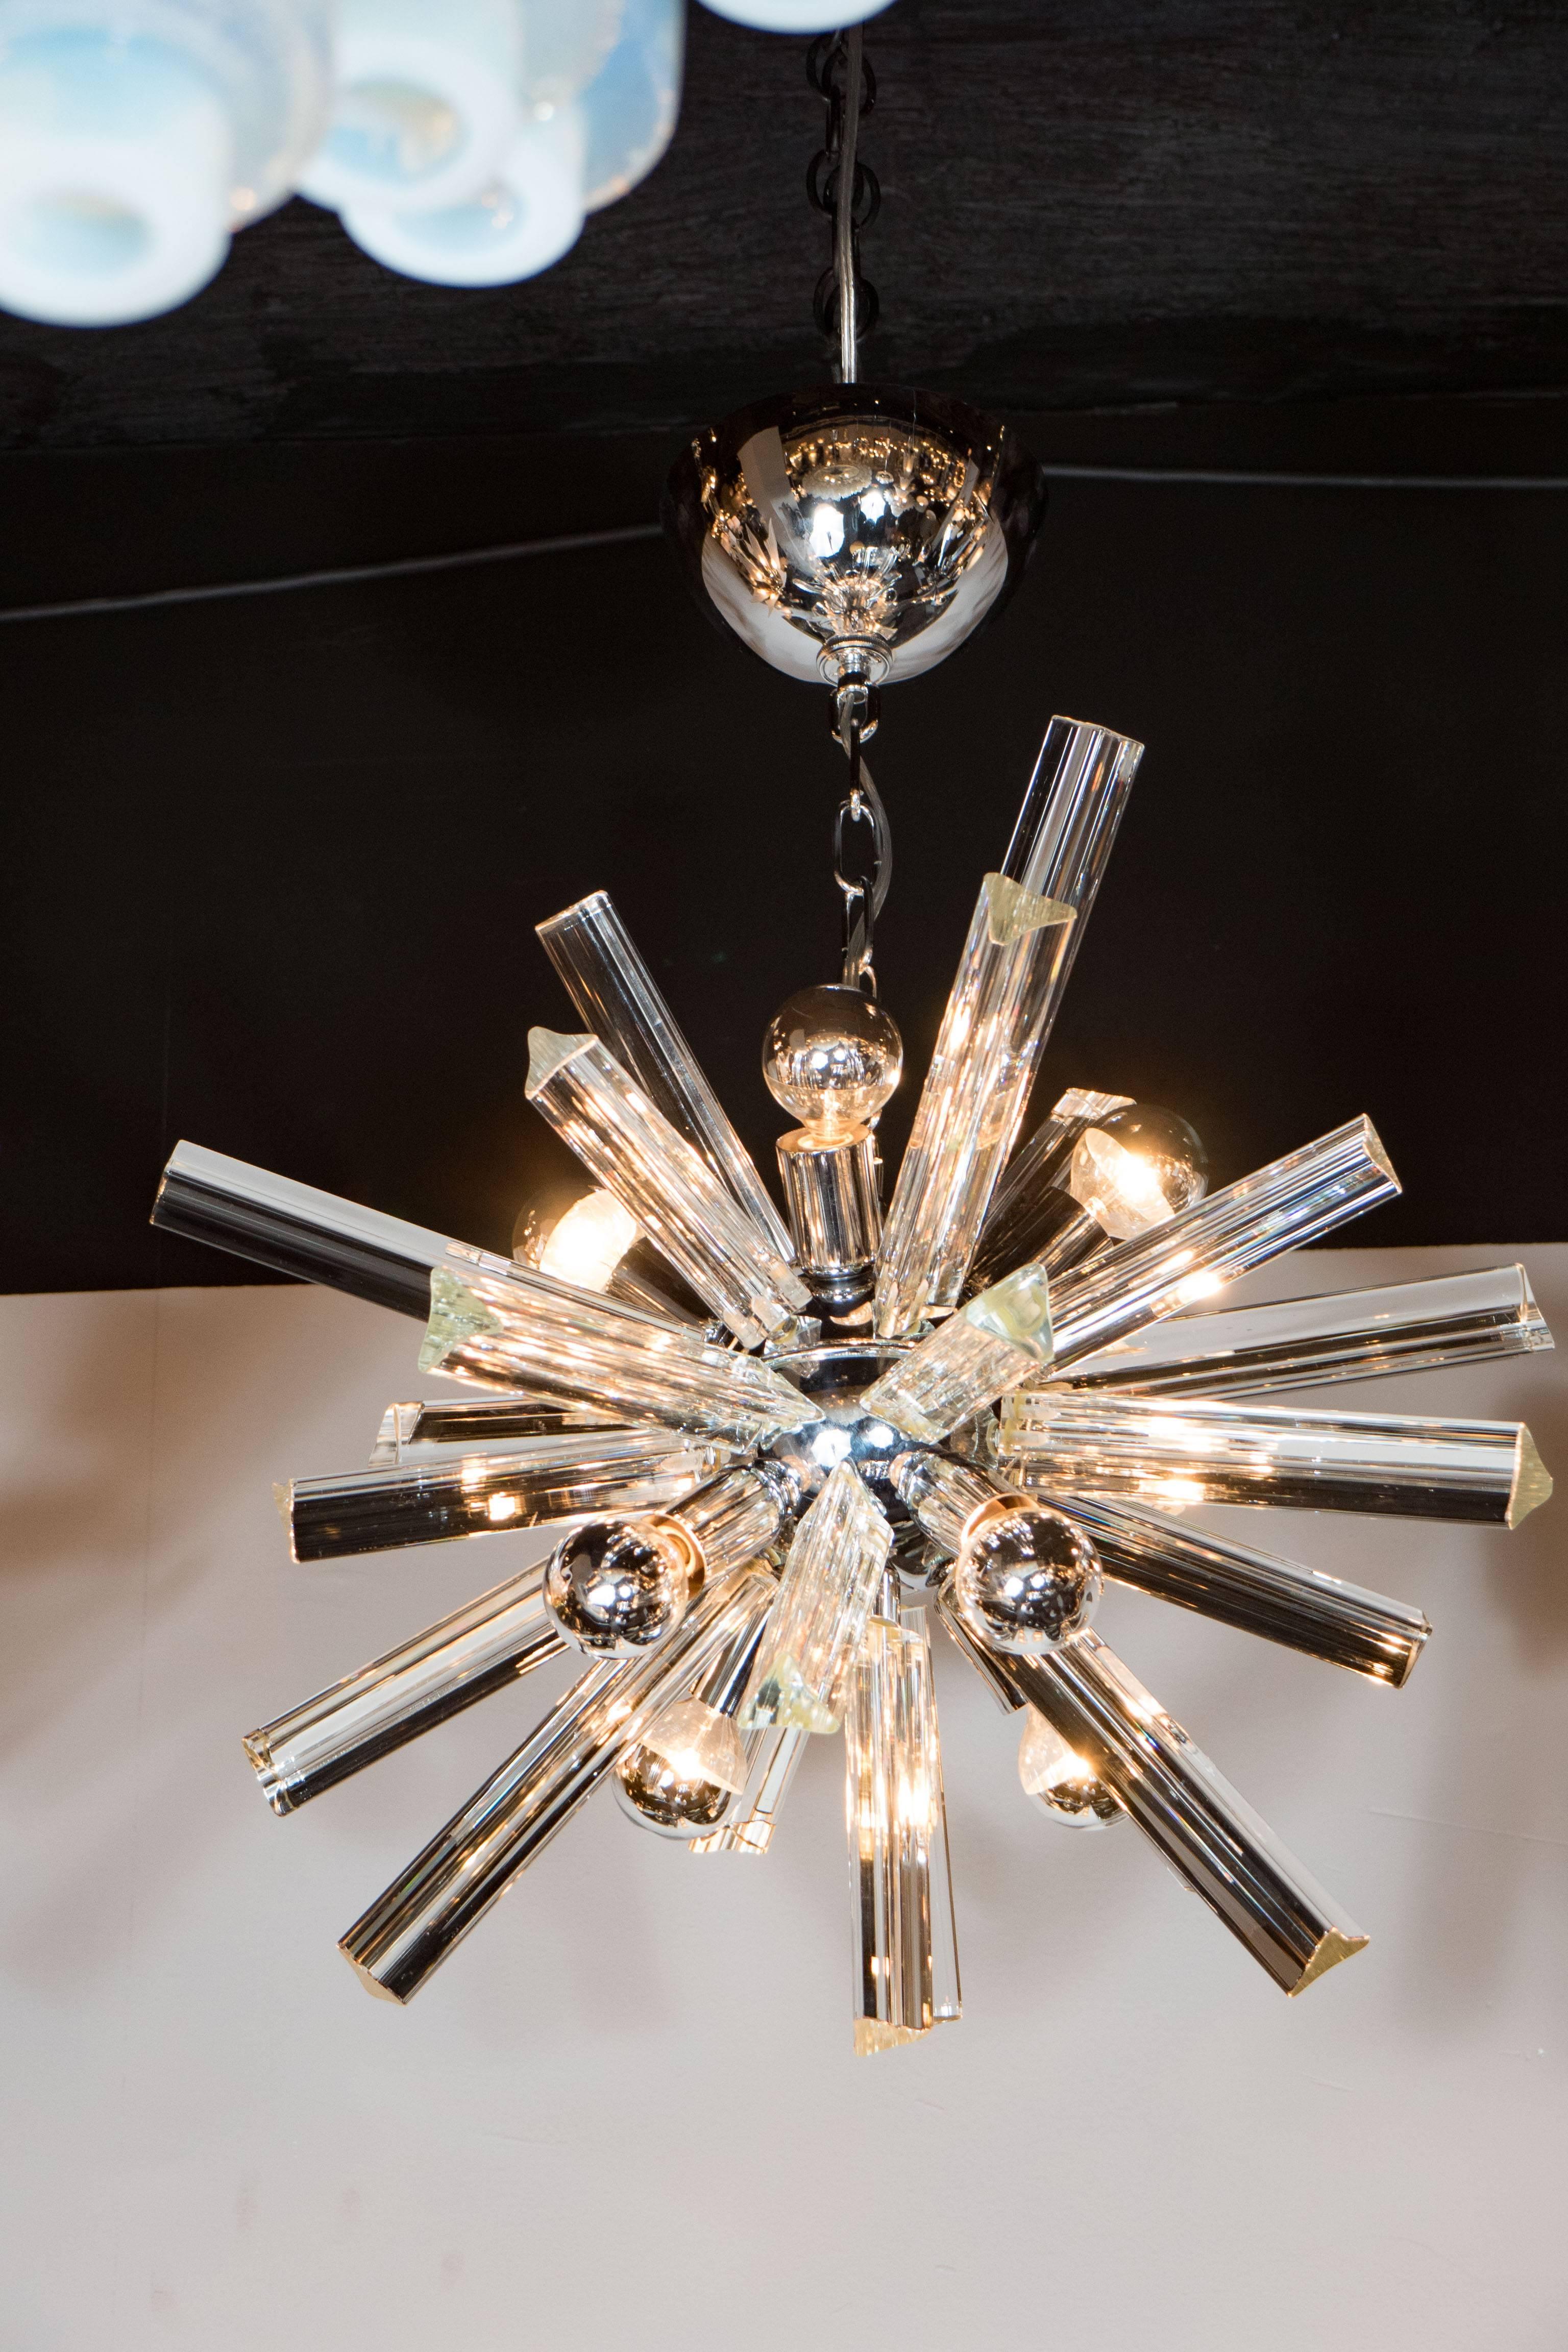 Late 20th Century Mid-Century Modern Sputnik Chrome Chandelier with Murano Triedre Rods by Camer